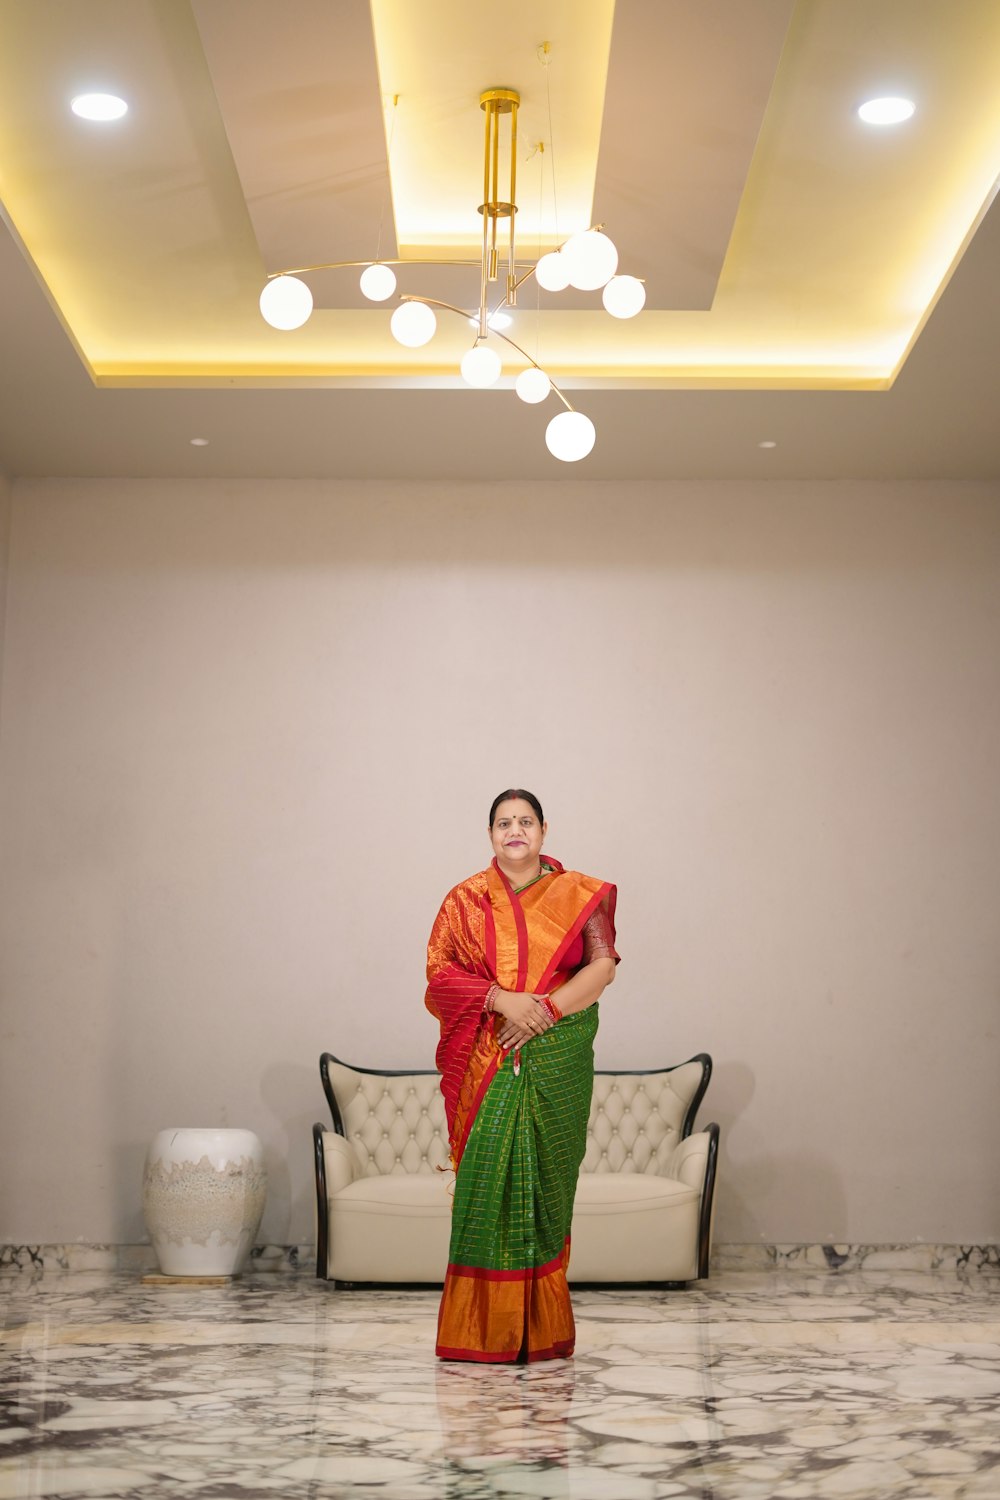 a person in a robe standing in a room with a white wall and lights